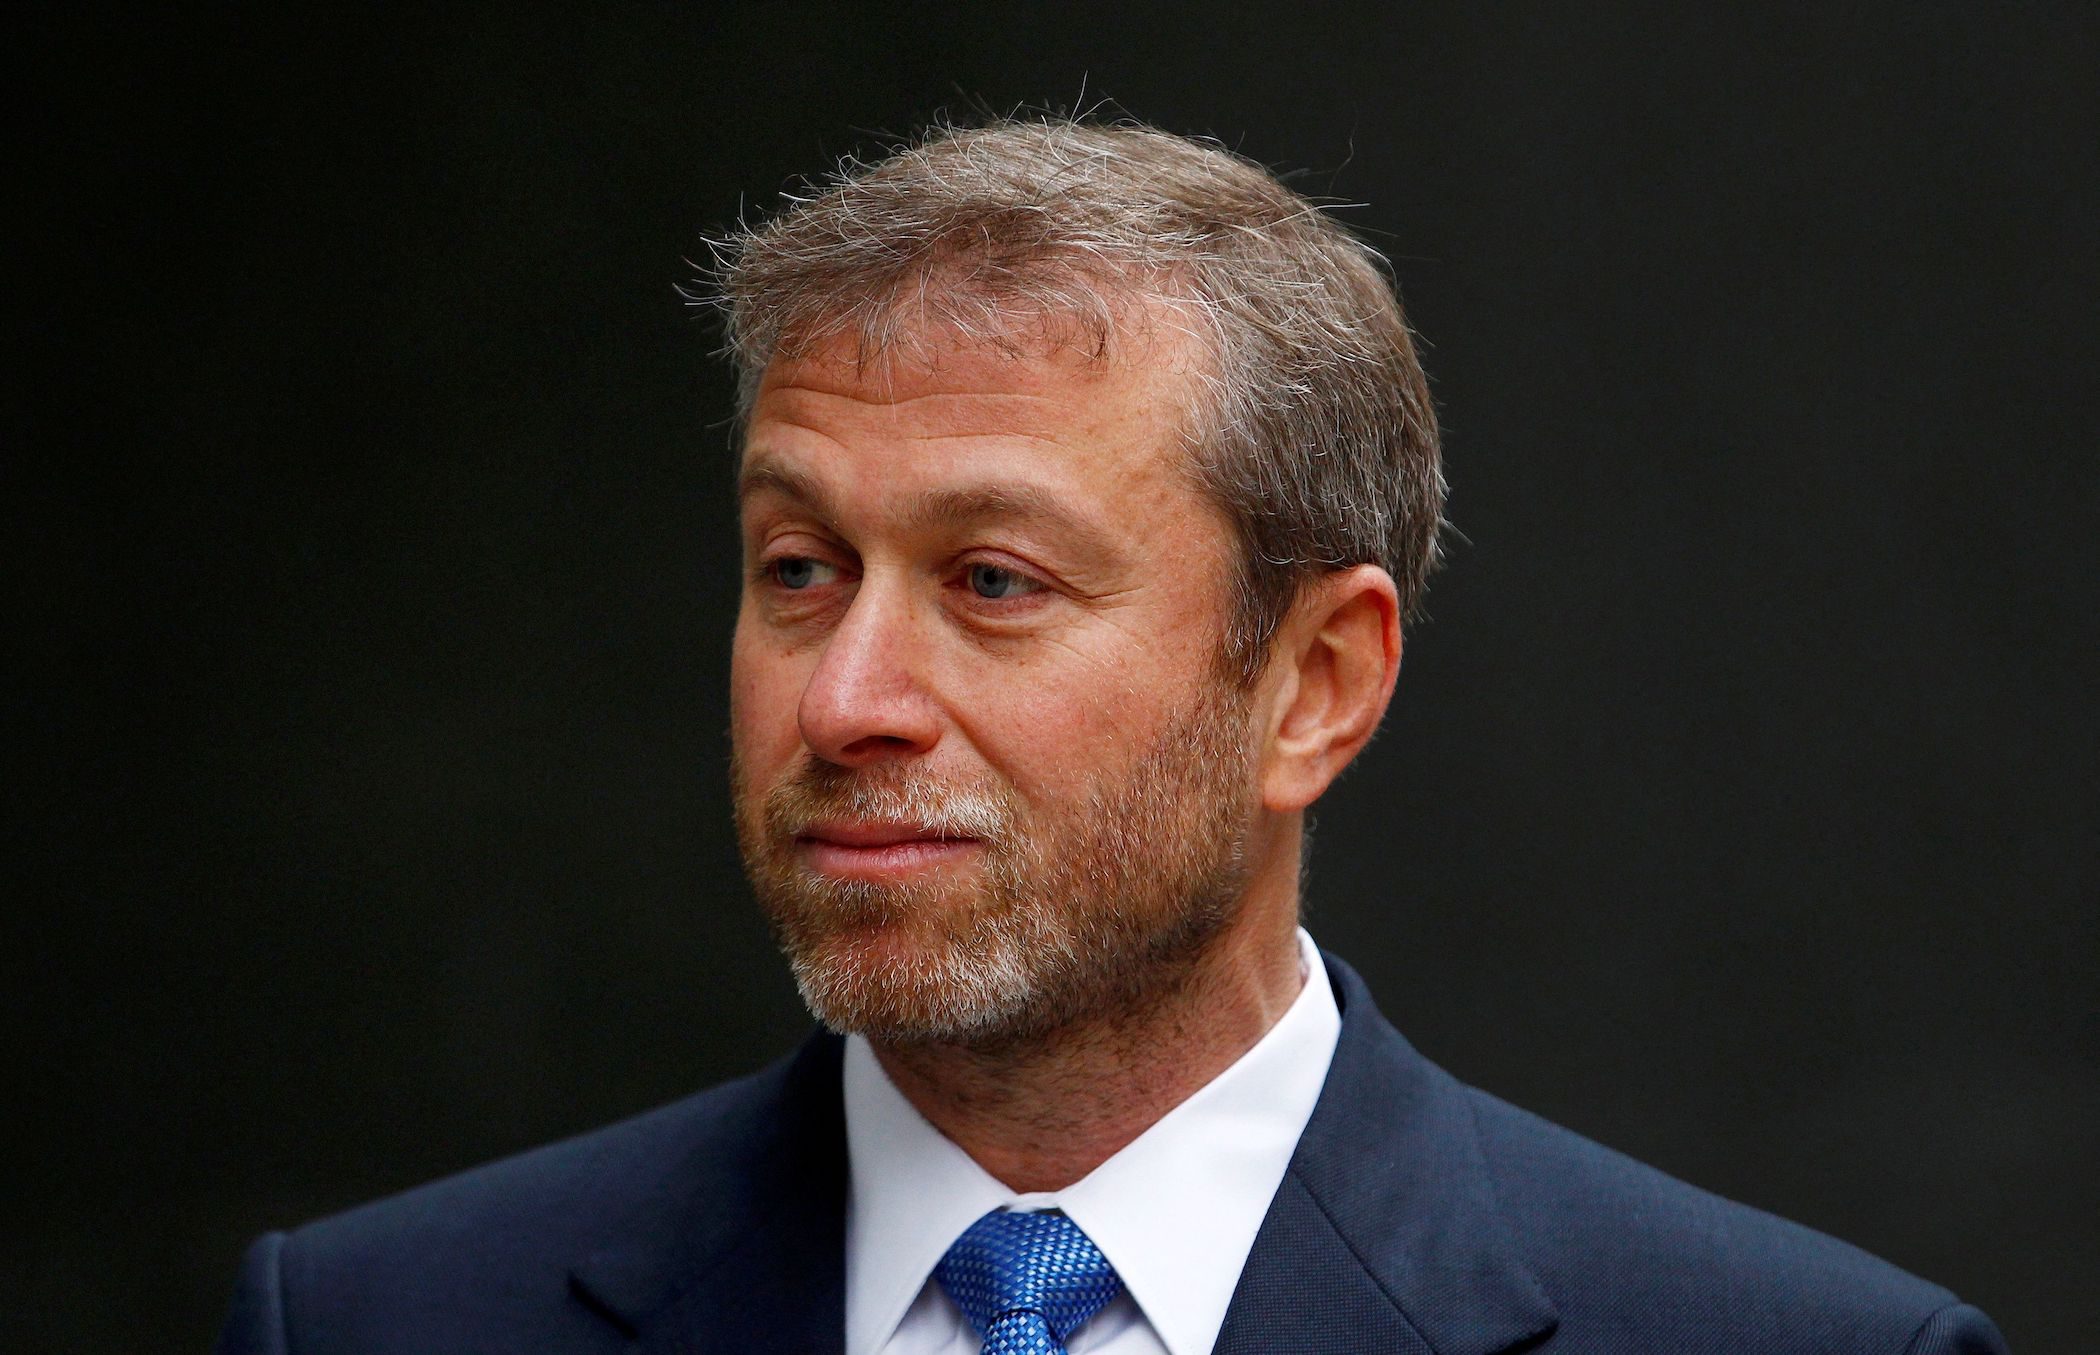 Chelsea owner Abramovich, Rosneft boss Sechin hit by UK sanctions